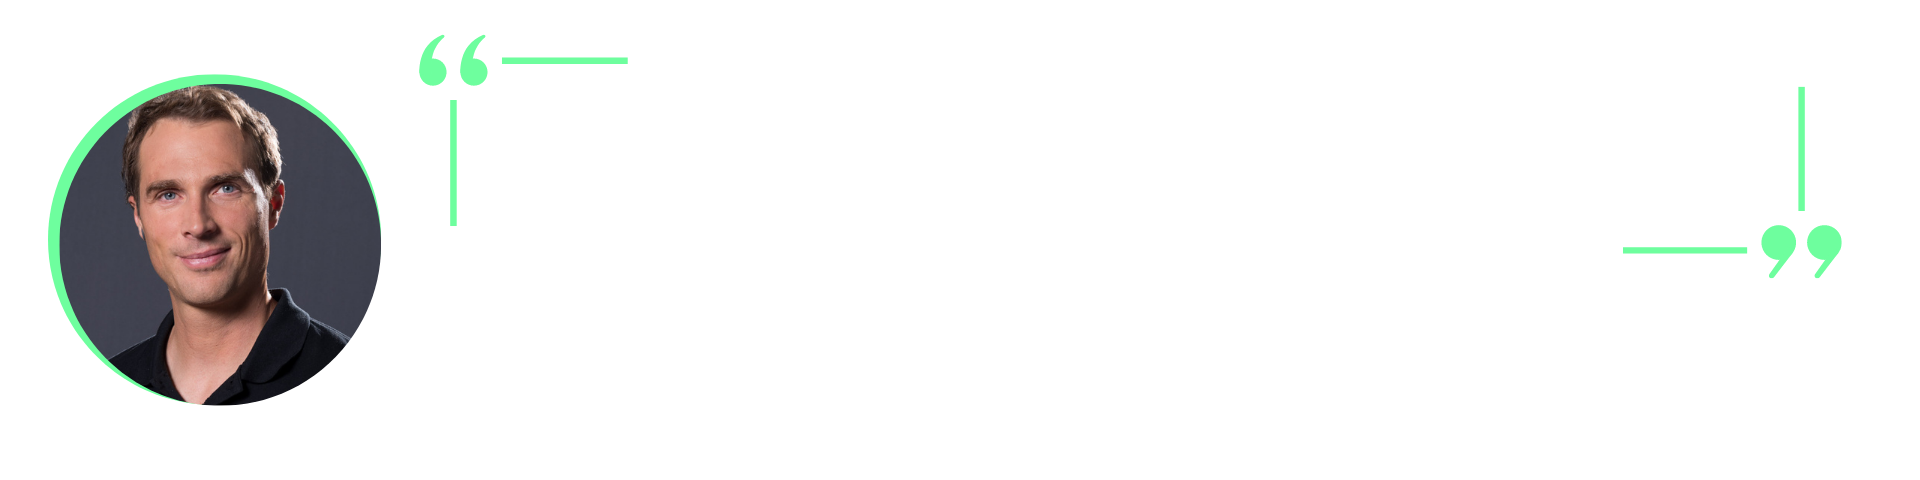 Doctor Vincent Costalat's quotation: 